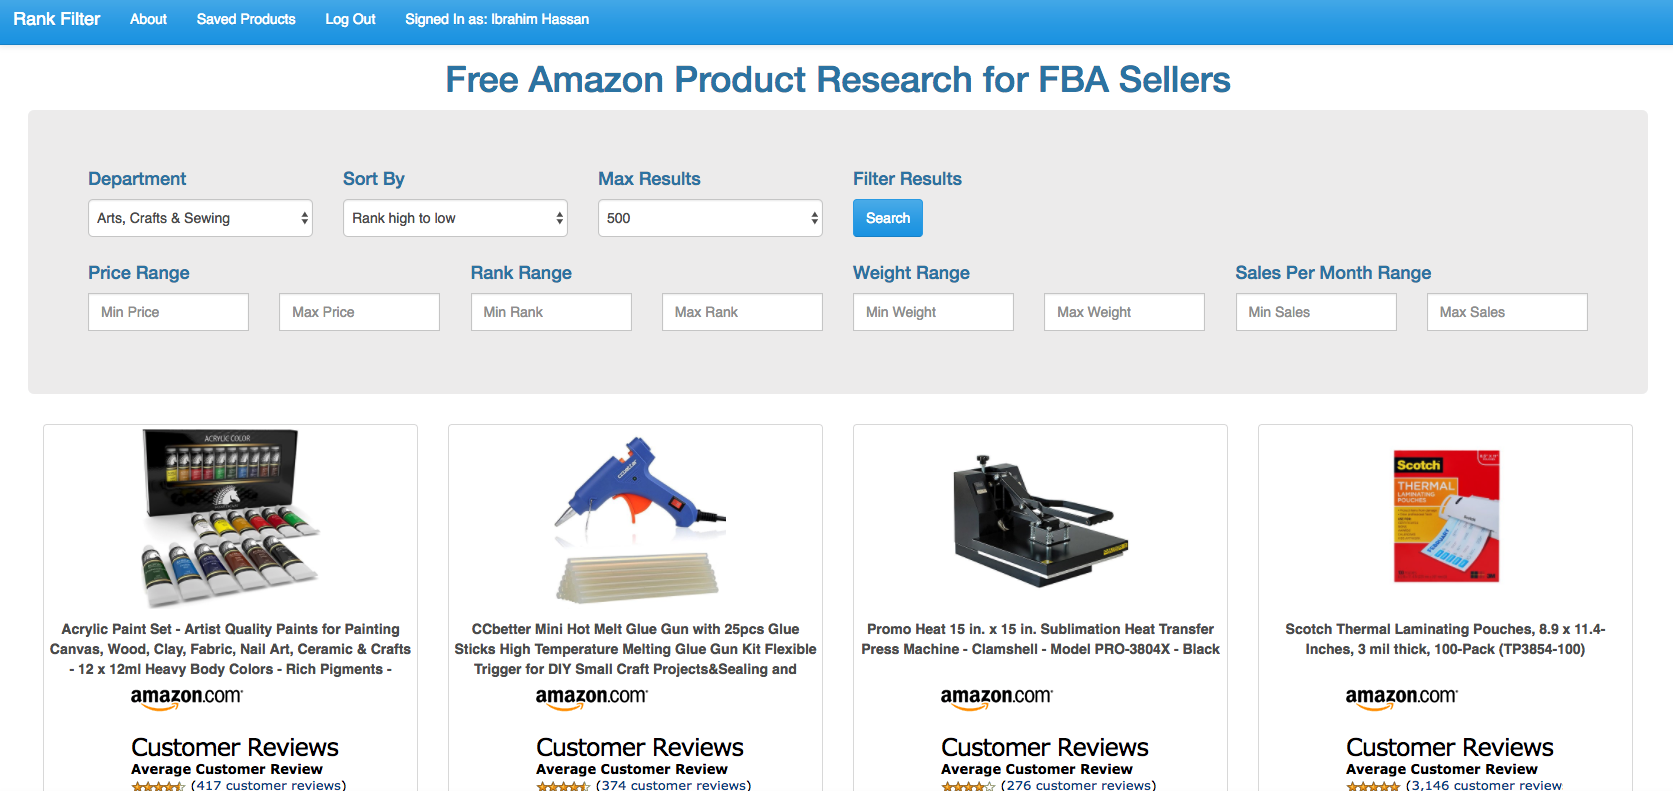 Free Amazon Product Research for FBA Sellers – Introducing Rankfilter.com